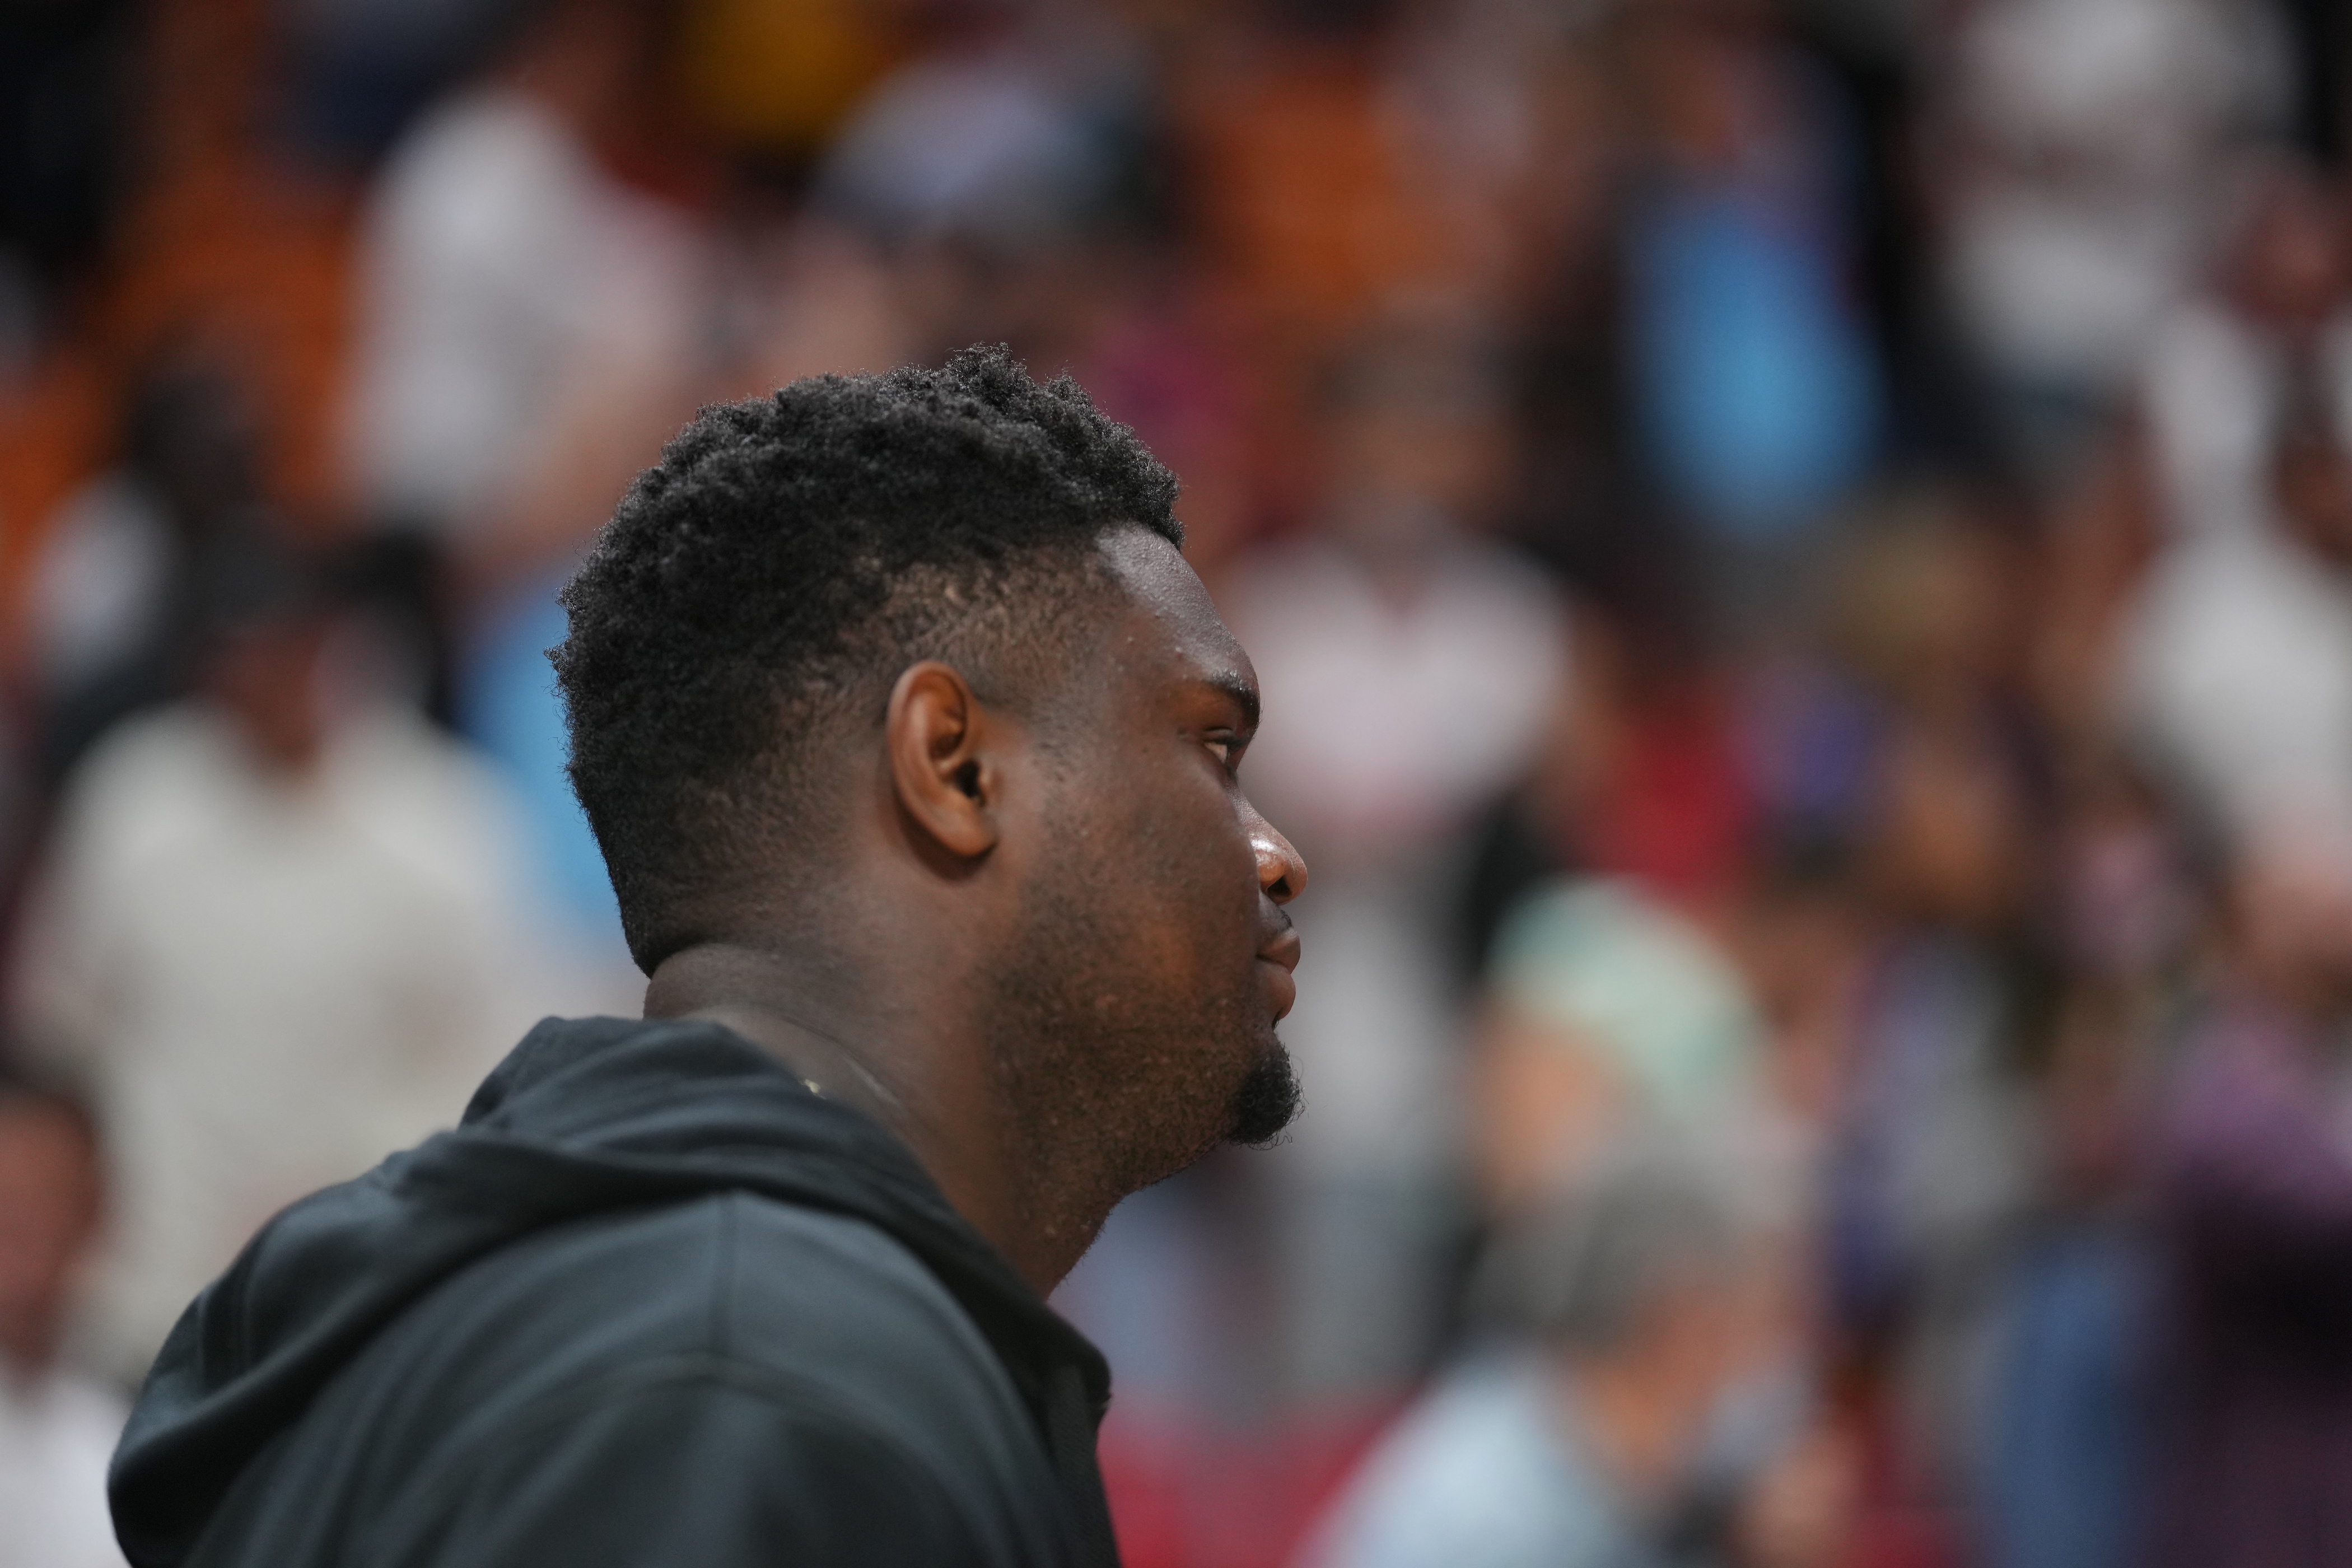 New Orleans Pelicans star Zion Williamson looks on during a game against the Miami Heat